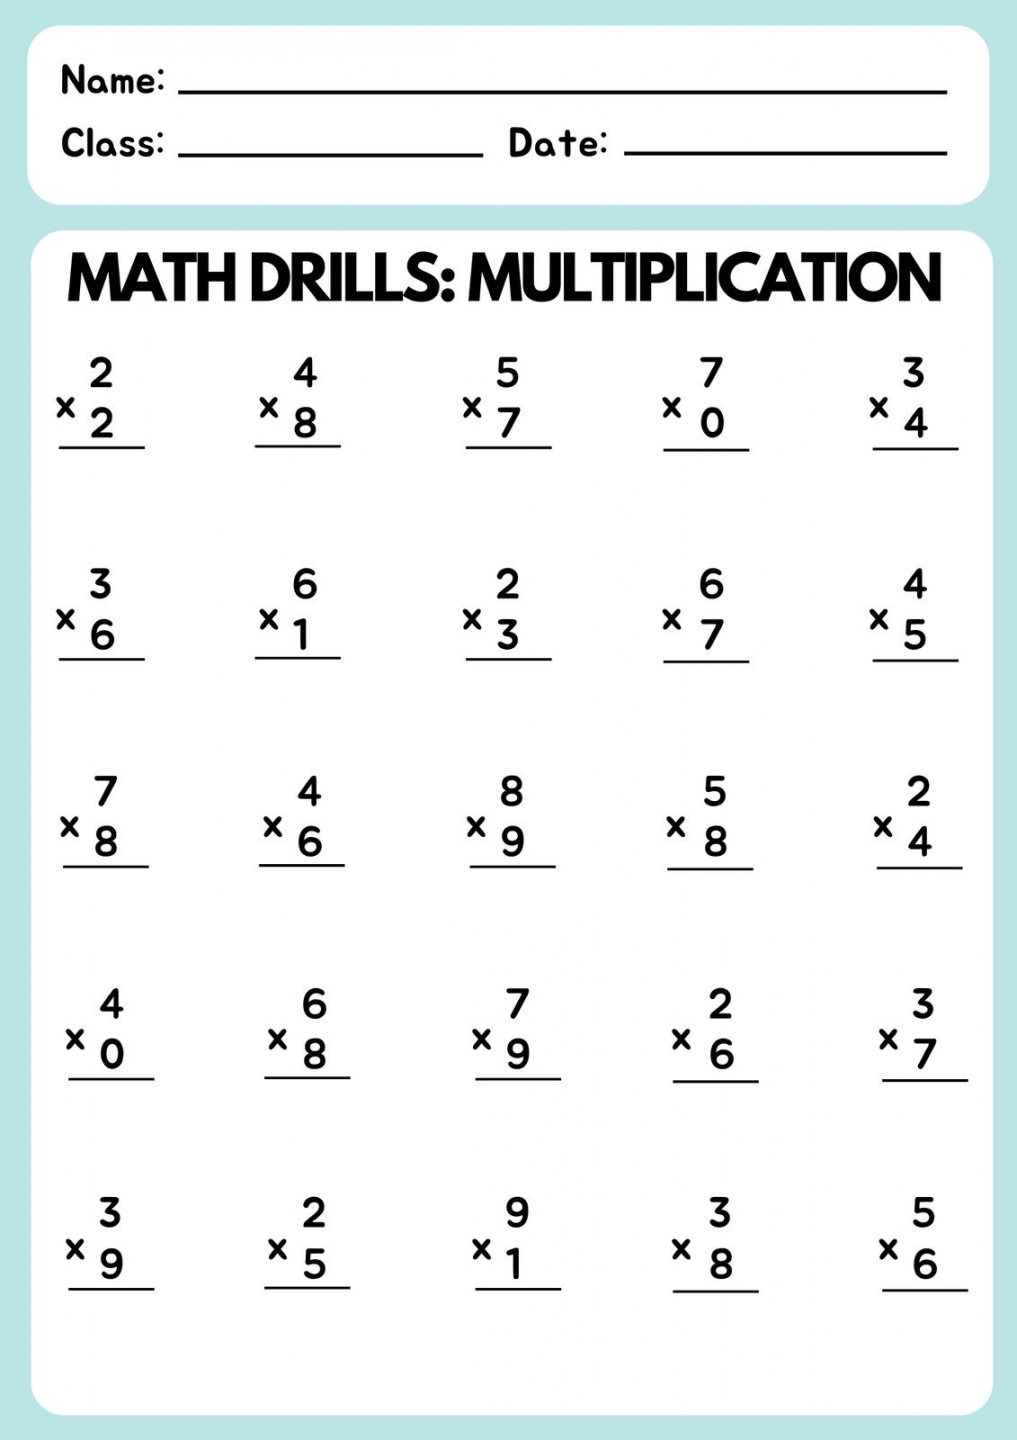 Free Multiplication Worksheets Printable - Printable - Free multiplication worksheet templates to use and print  Canva